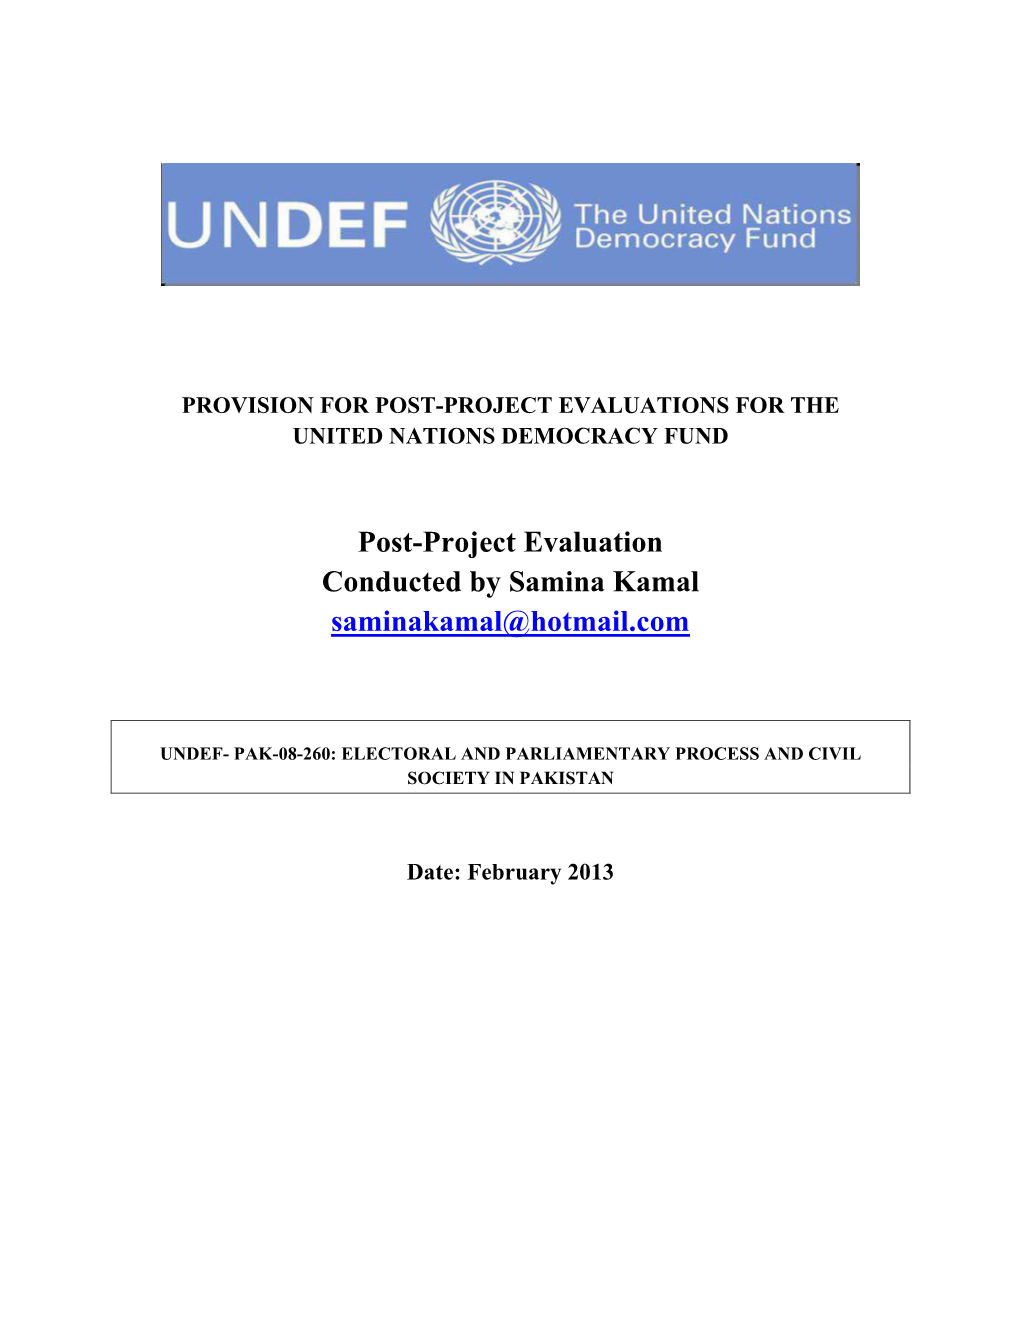 Undef Evaluation Report- Undef- Pak-08-260 Electoral and Parliamentary Process and Civil Society in Pakistan